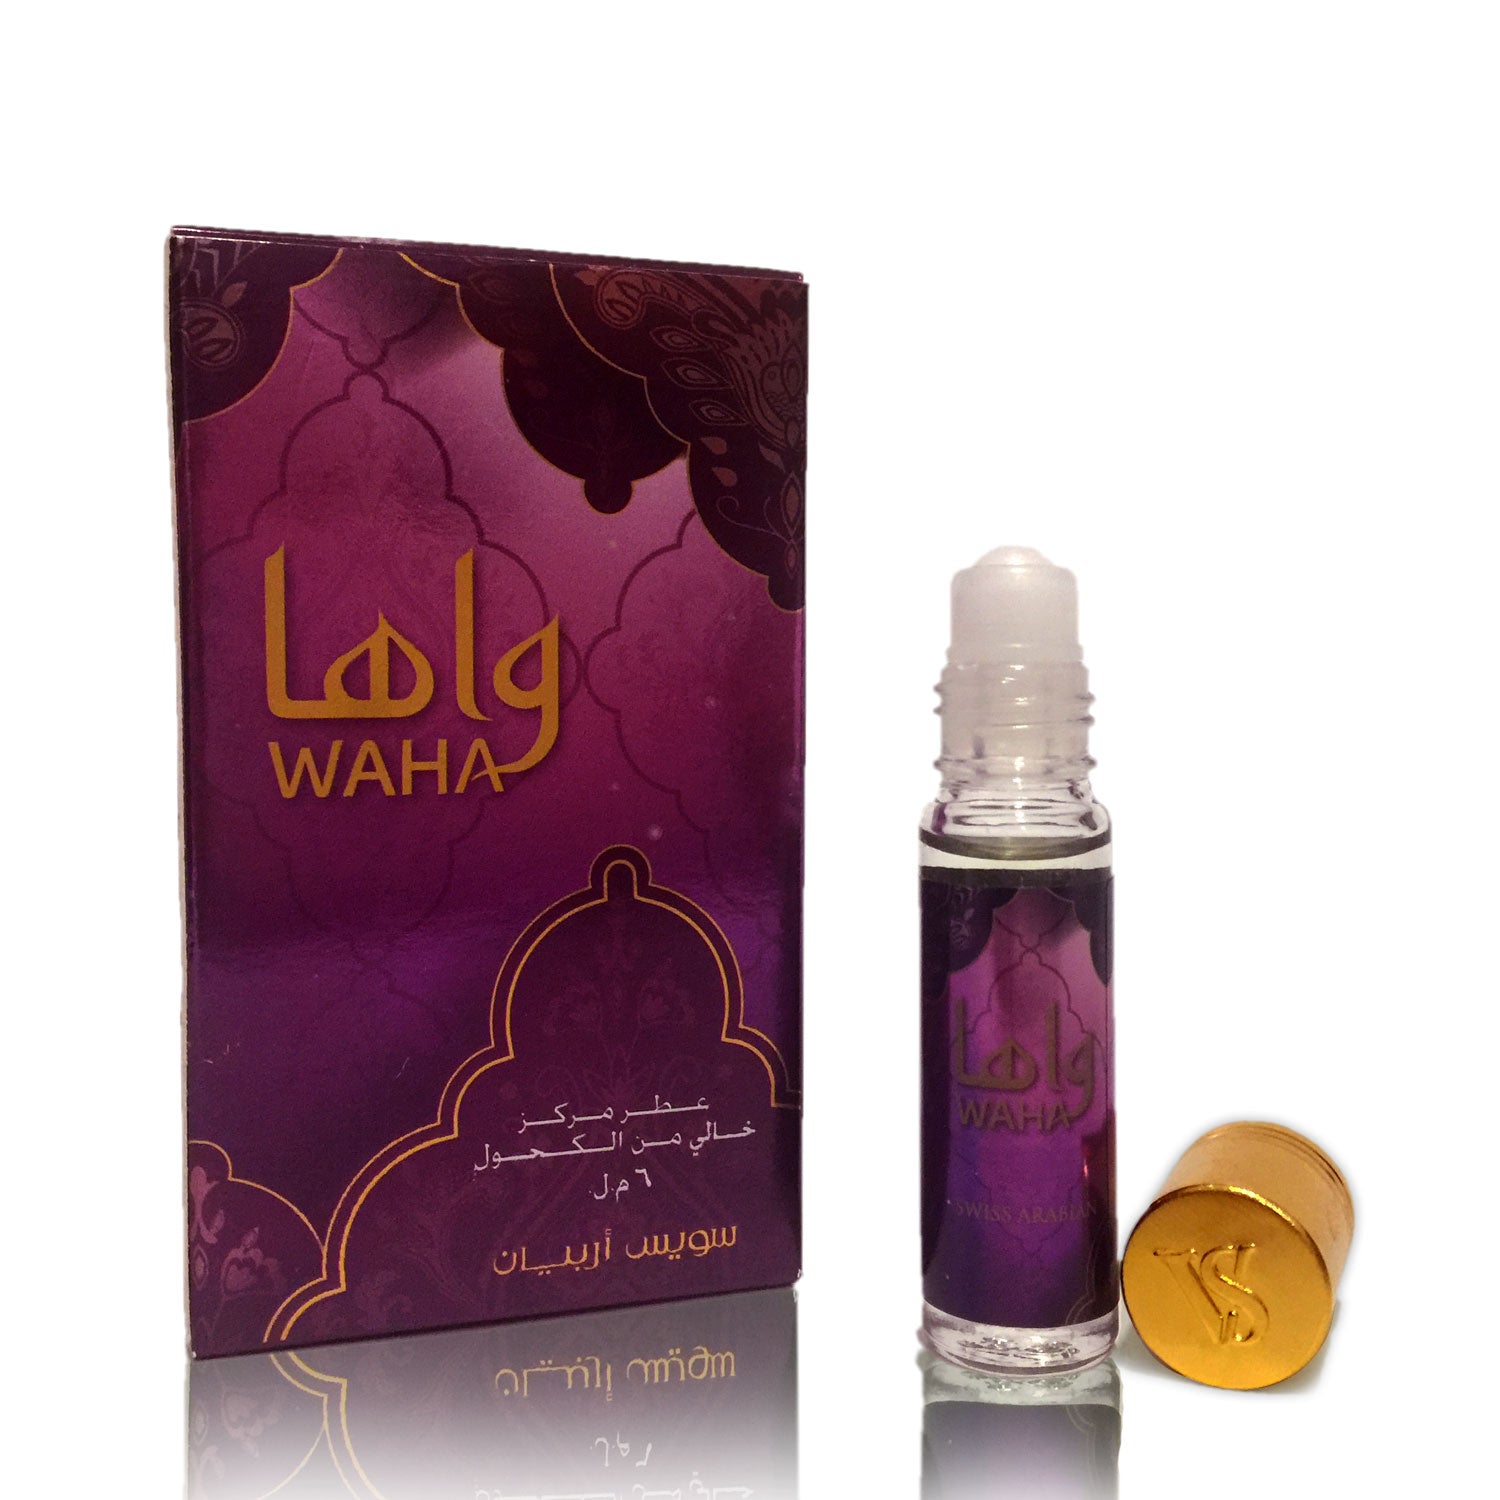 WAHA, Roll On Perfume Oil 6 mL (.2 oz) | Musk, Floral, Fruity, Woody and Citrus Notes